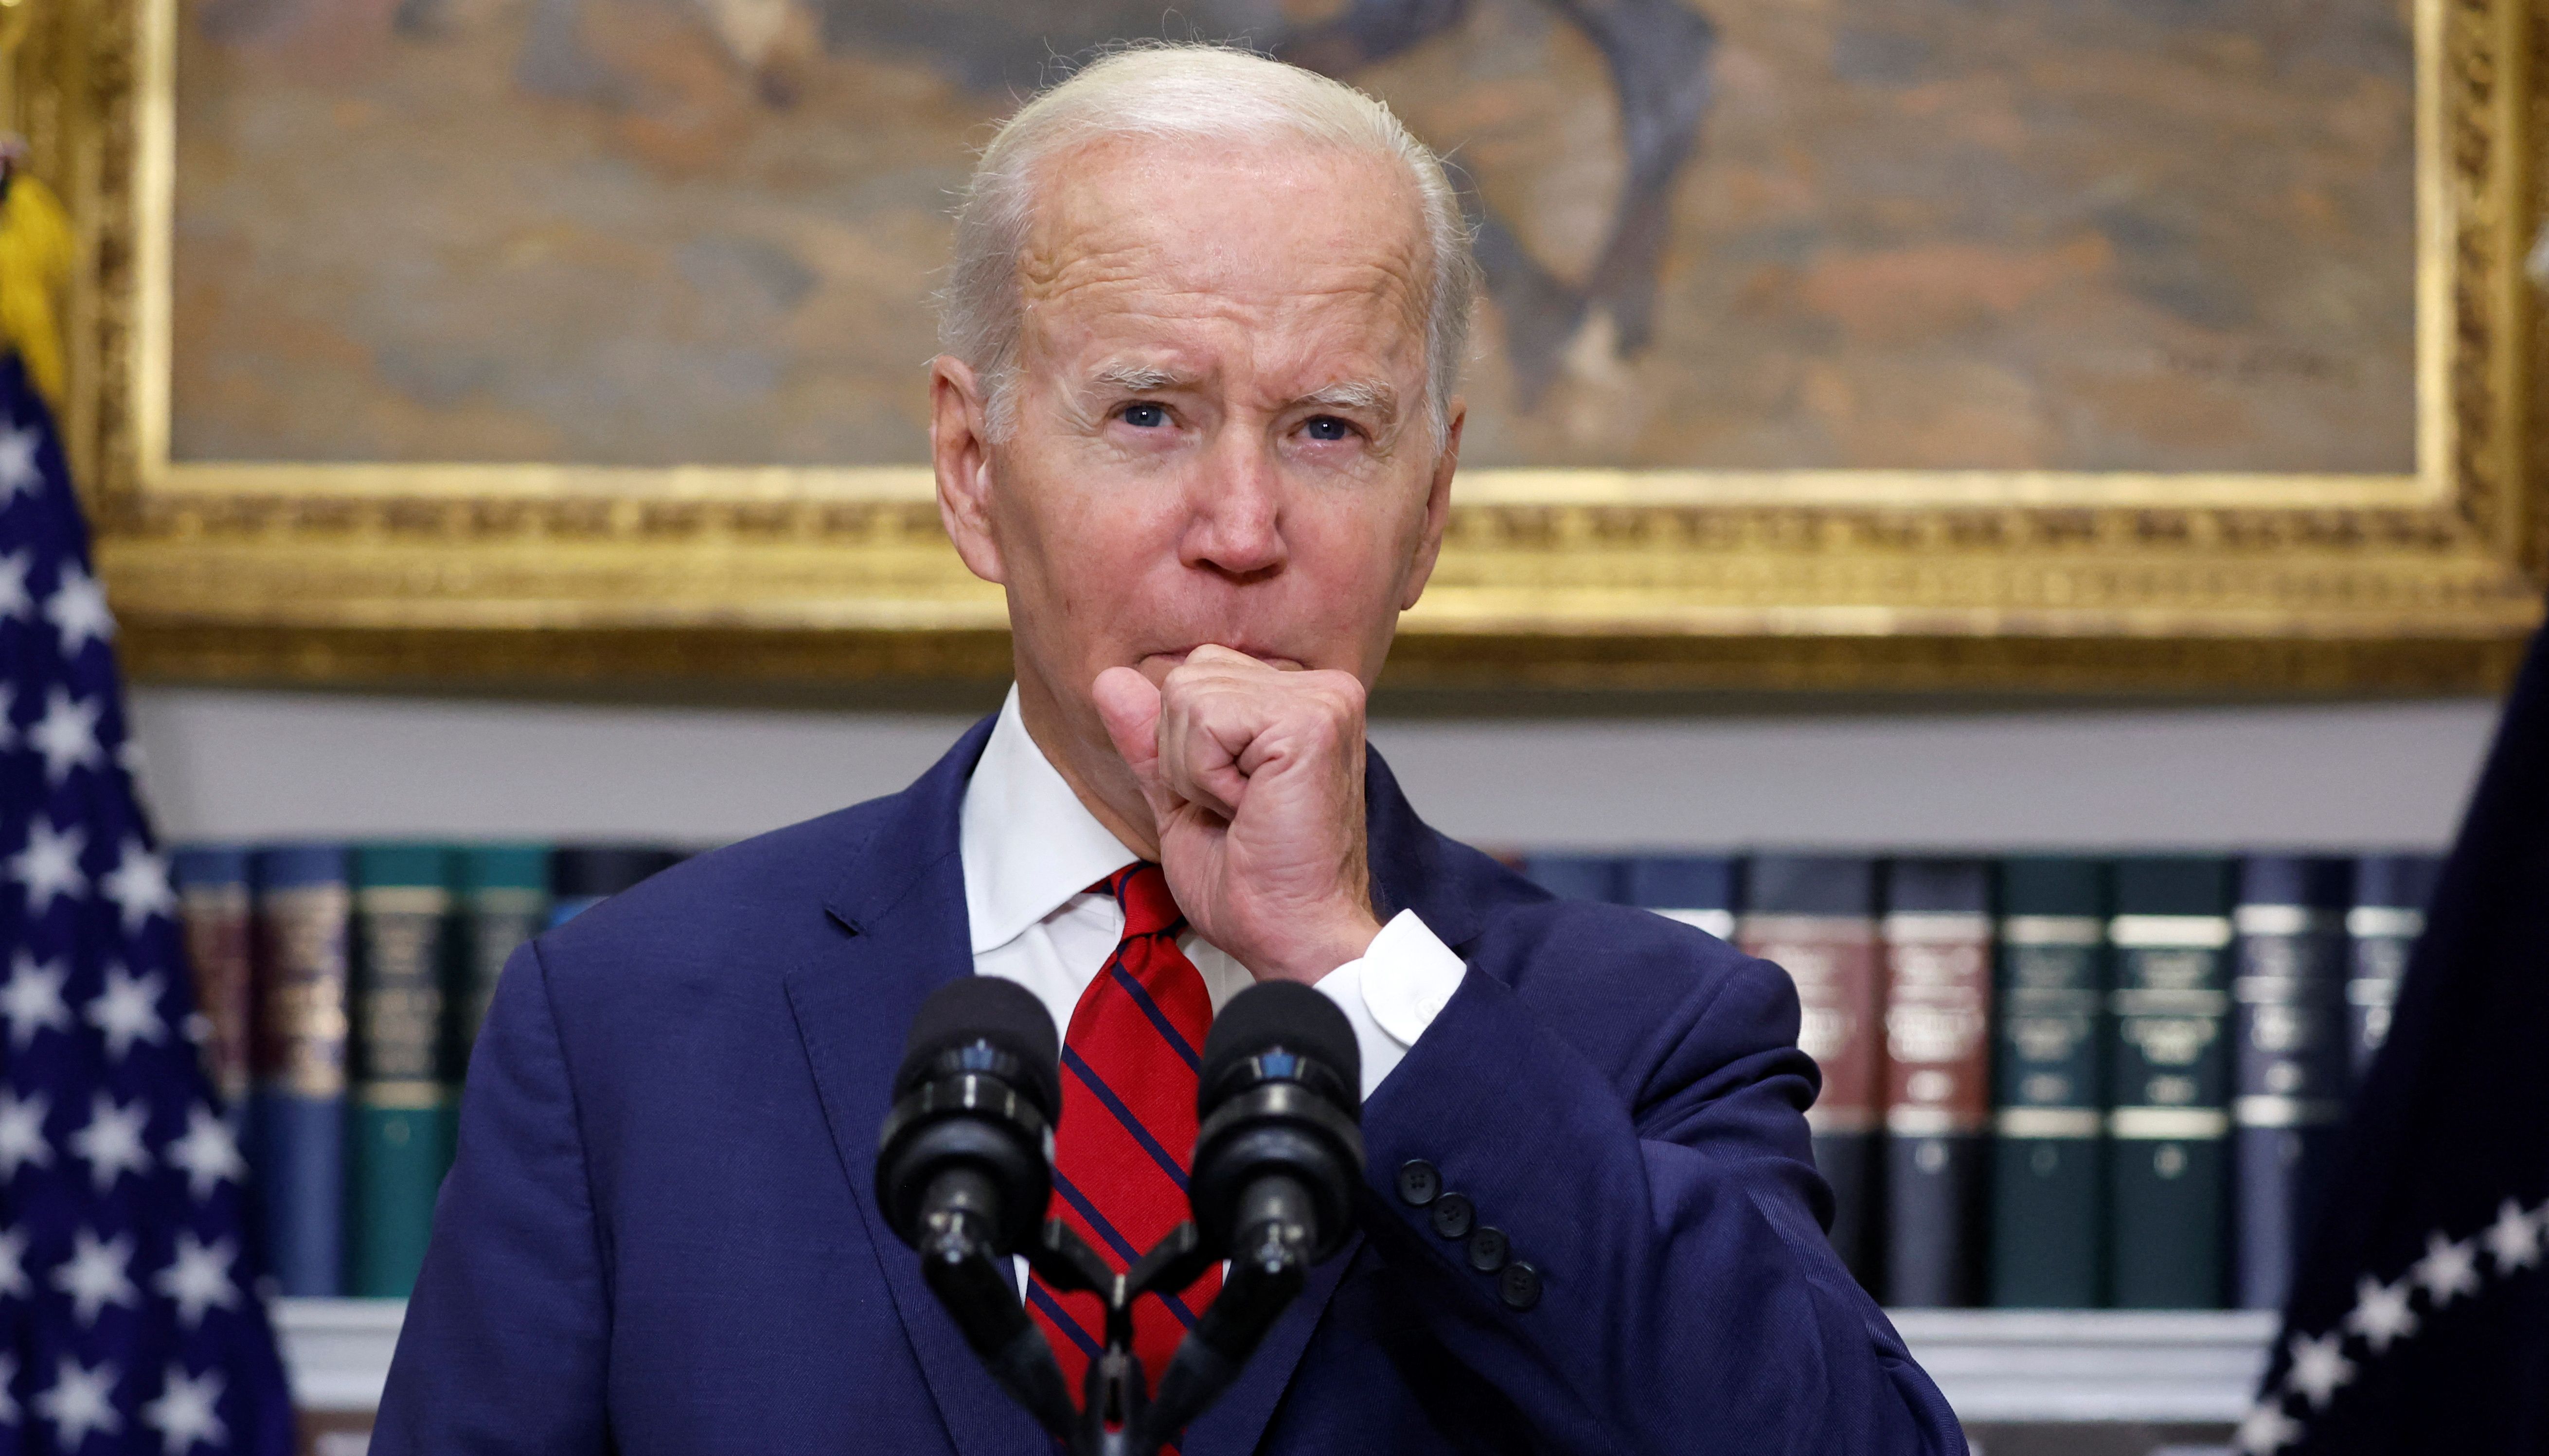 Joe Biden said 'everything is more complicated' if you're unvaccinated.